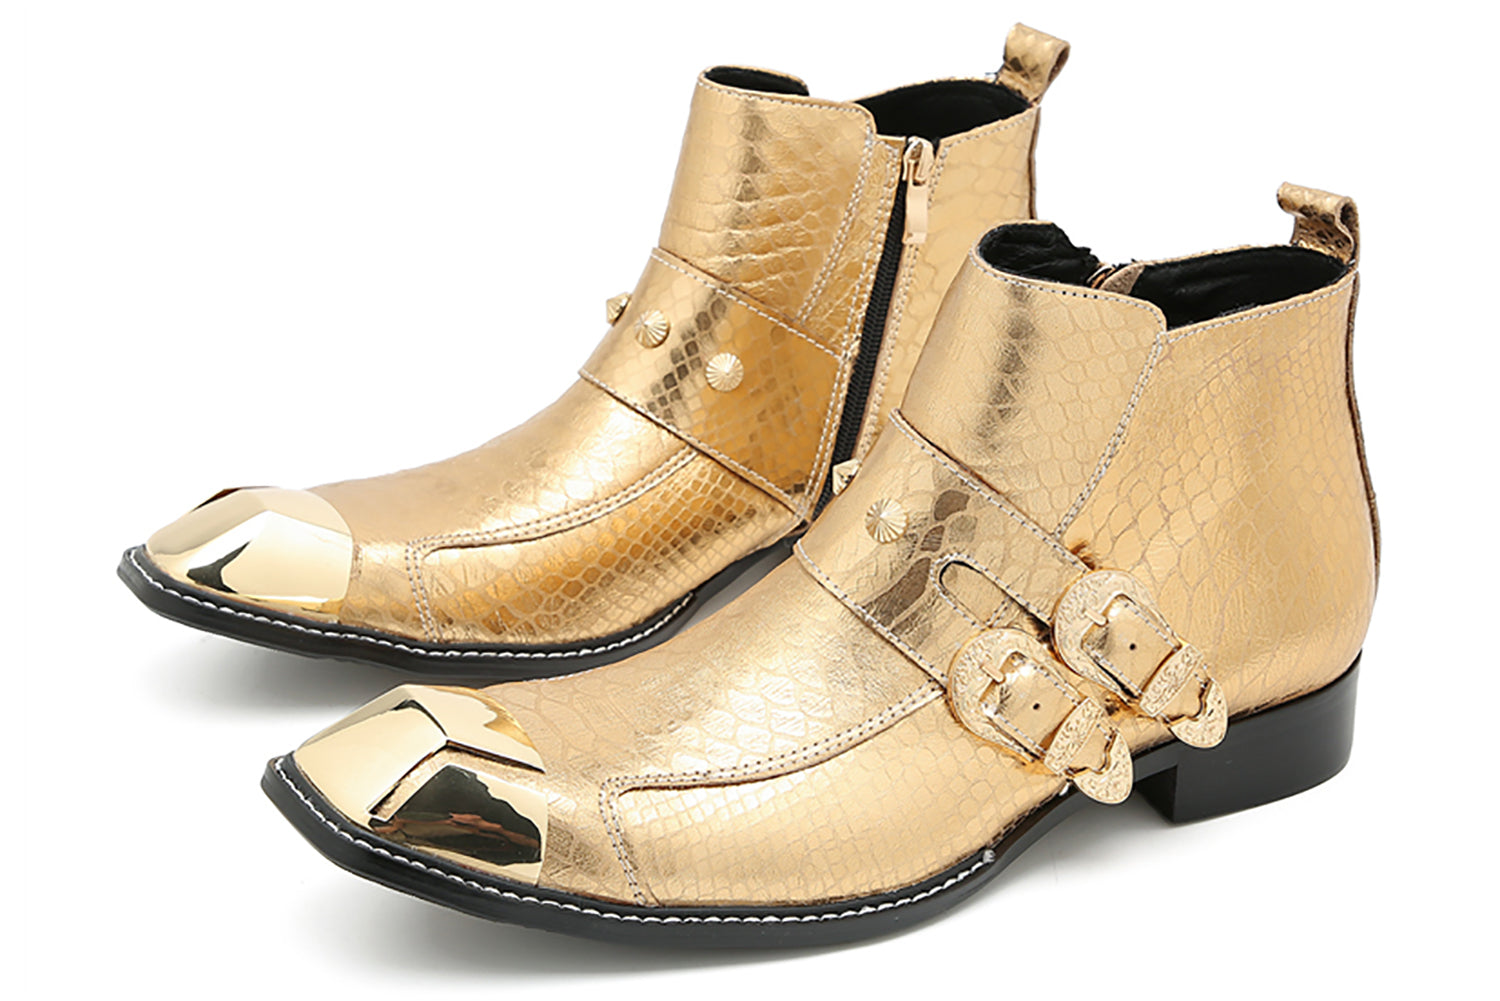 Men's Metal Square Toe Double Buckles Western Boots